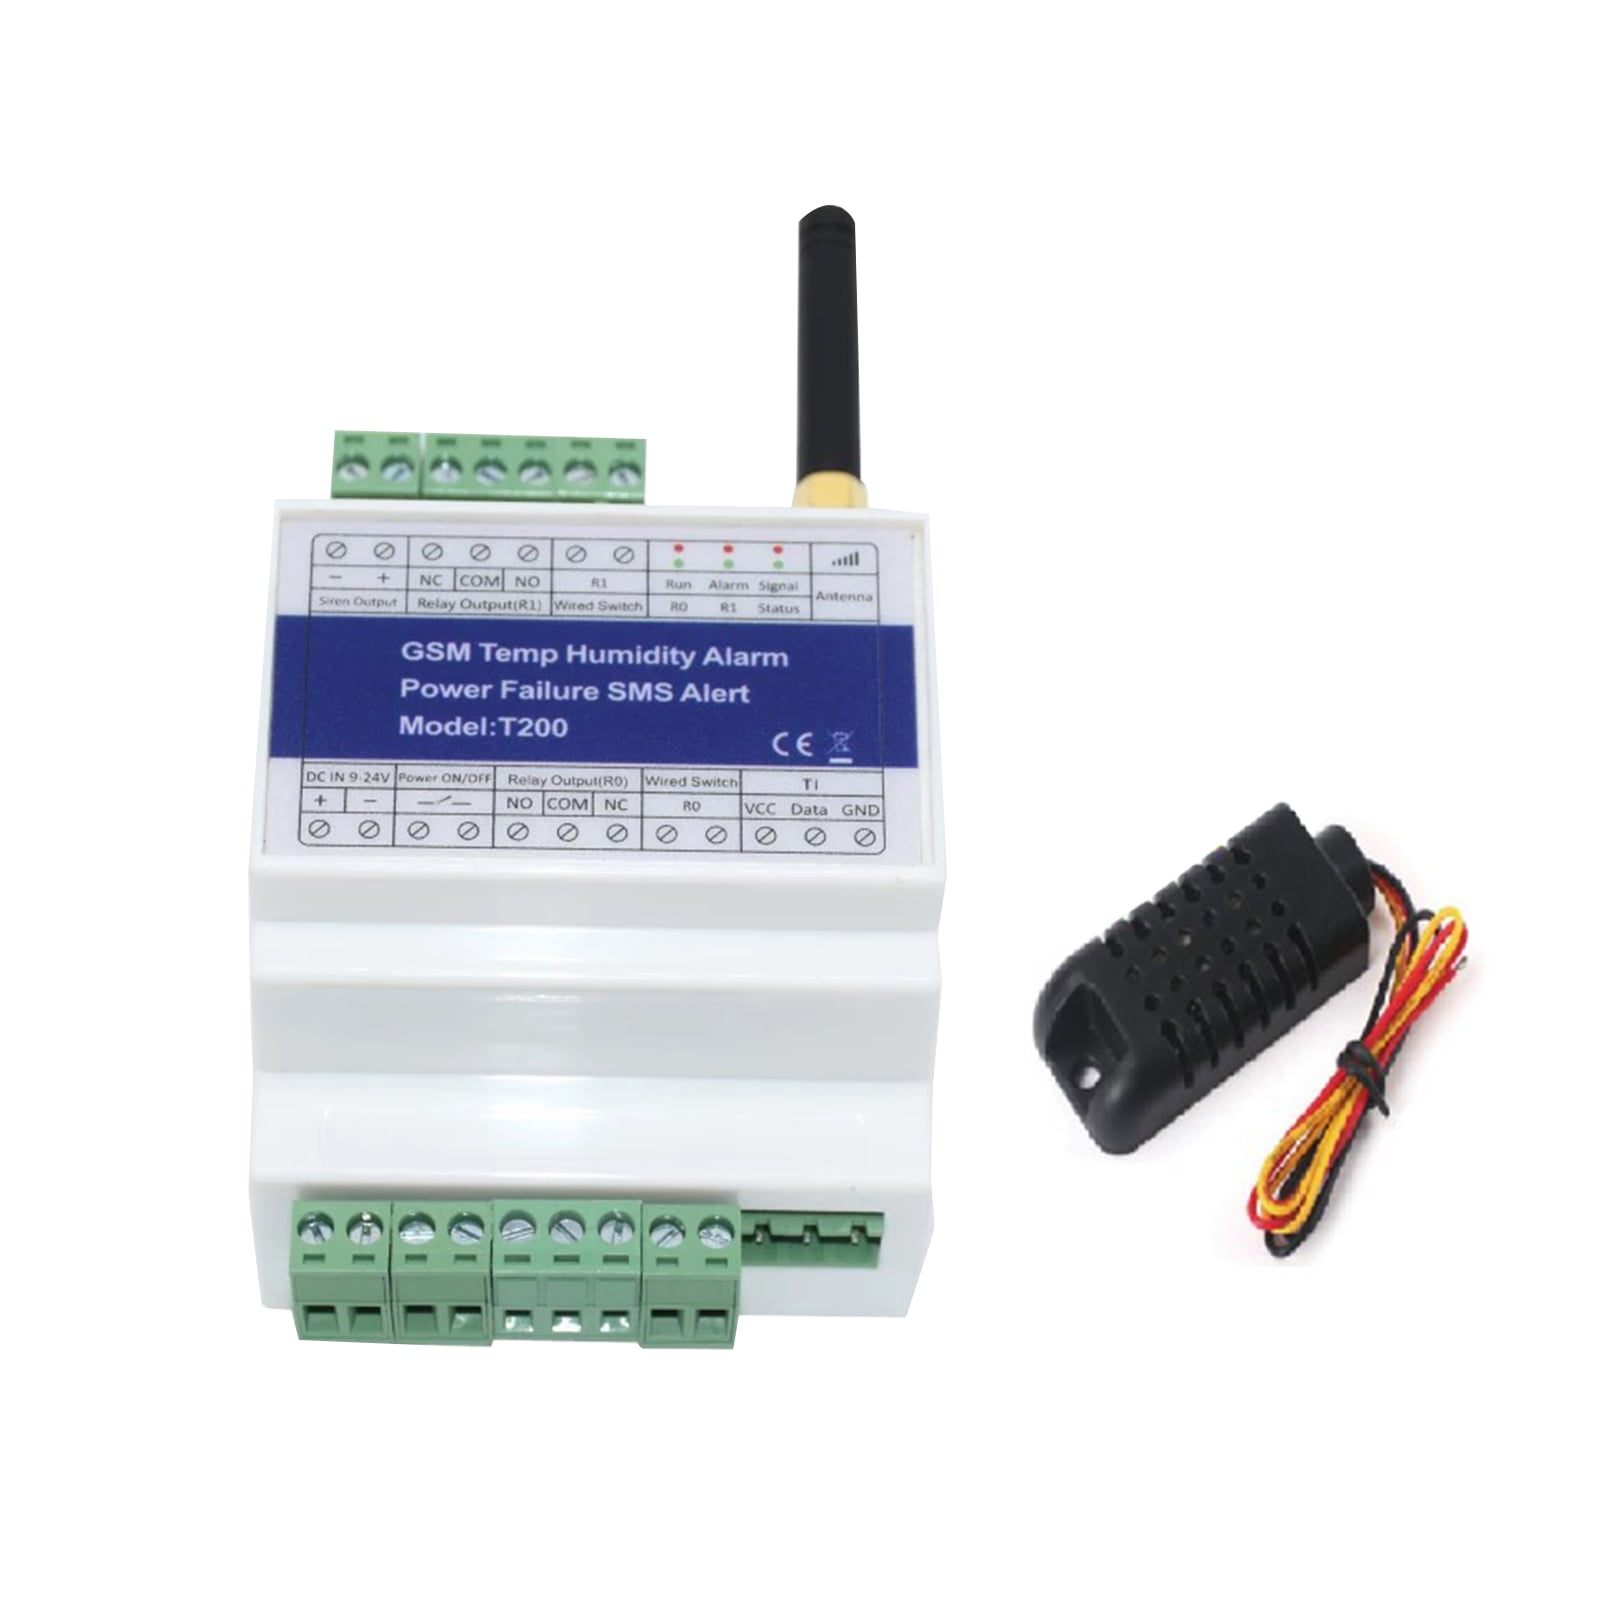 Details about   GSM SMS Temperature Humidity Alarm System Power Failure Alert Remote Control DC 